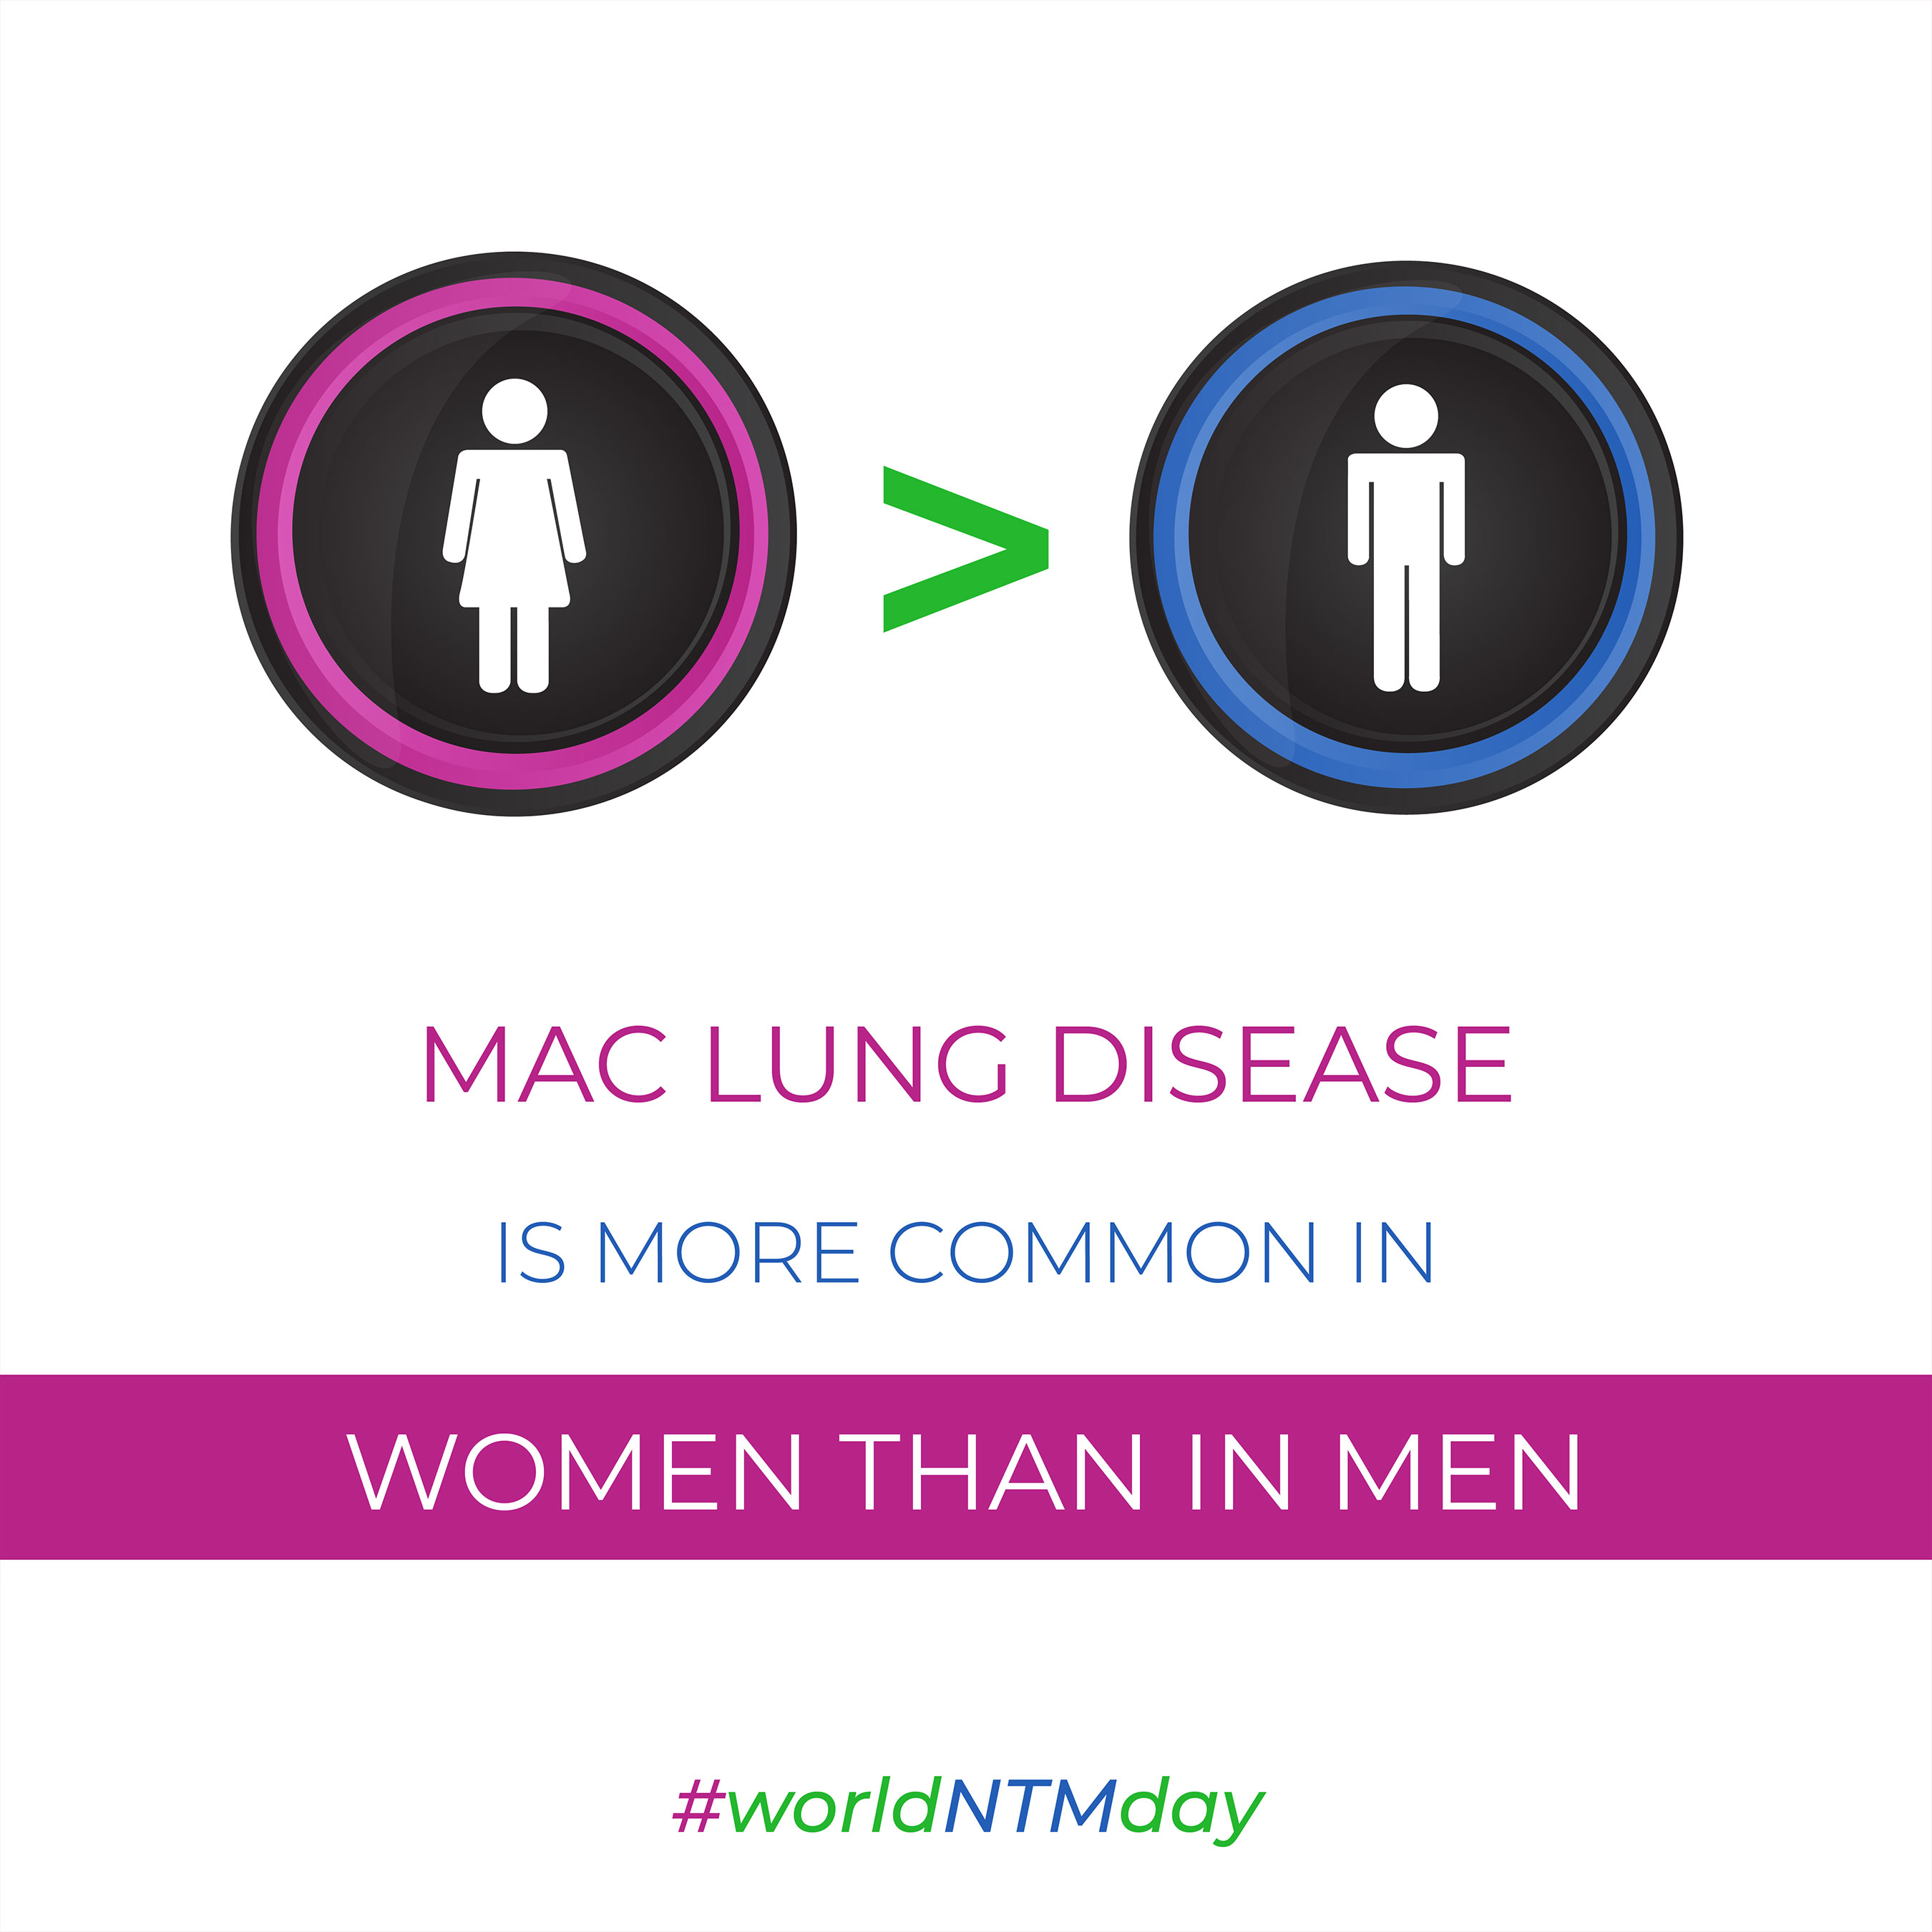 Empowering patients, supporting healthcare providers, and driving nontuberculous mycobacterial (NTM) research forward. That's what we stand for every day. Join us in making a lasting impact! Visit https://worldntmday.org for more resources on NTM disease. #FightNTM #NTMAwareness #NTMresearch #worldntmday